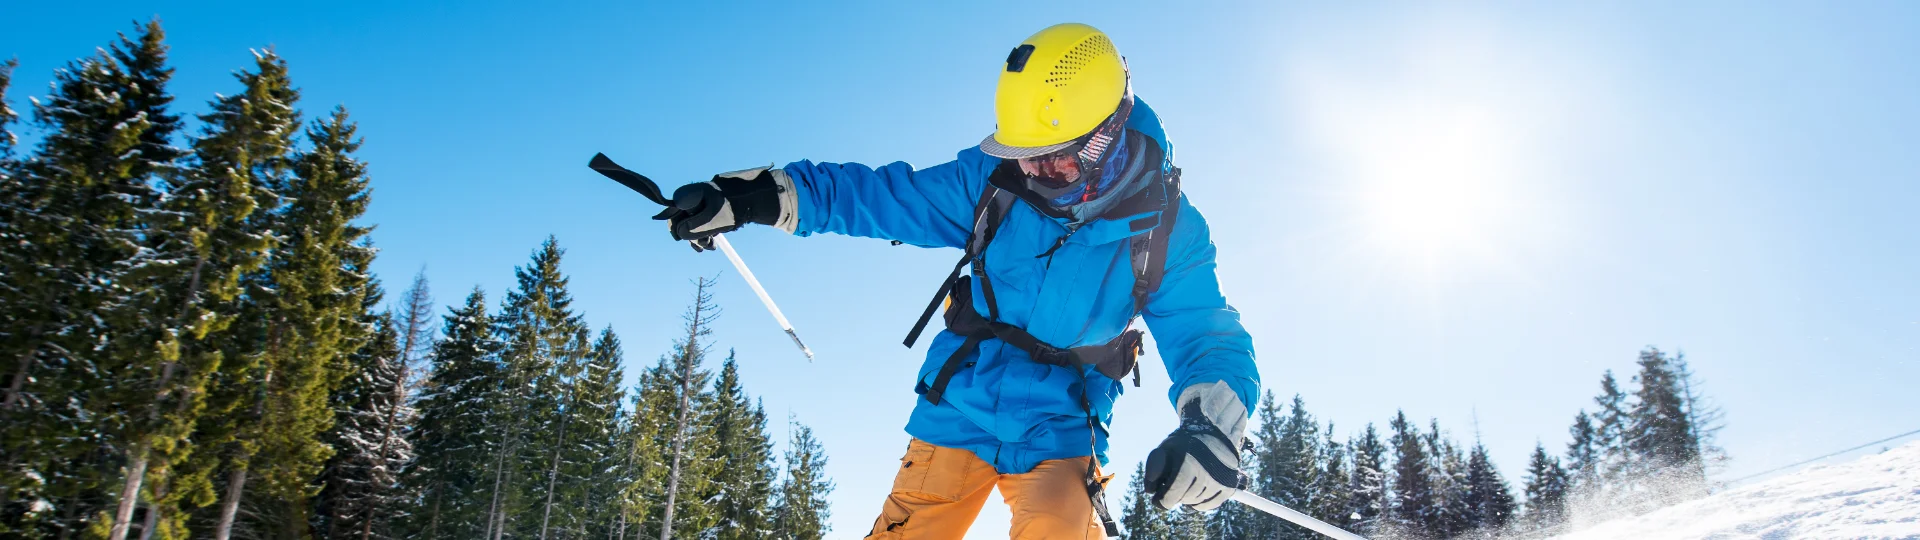 How to choose the size of your ski helmet?